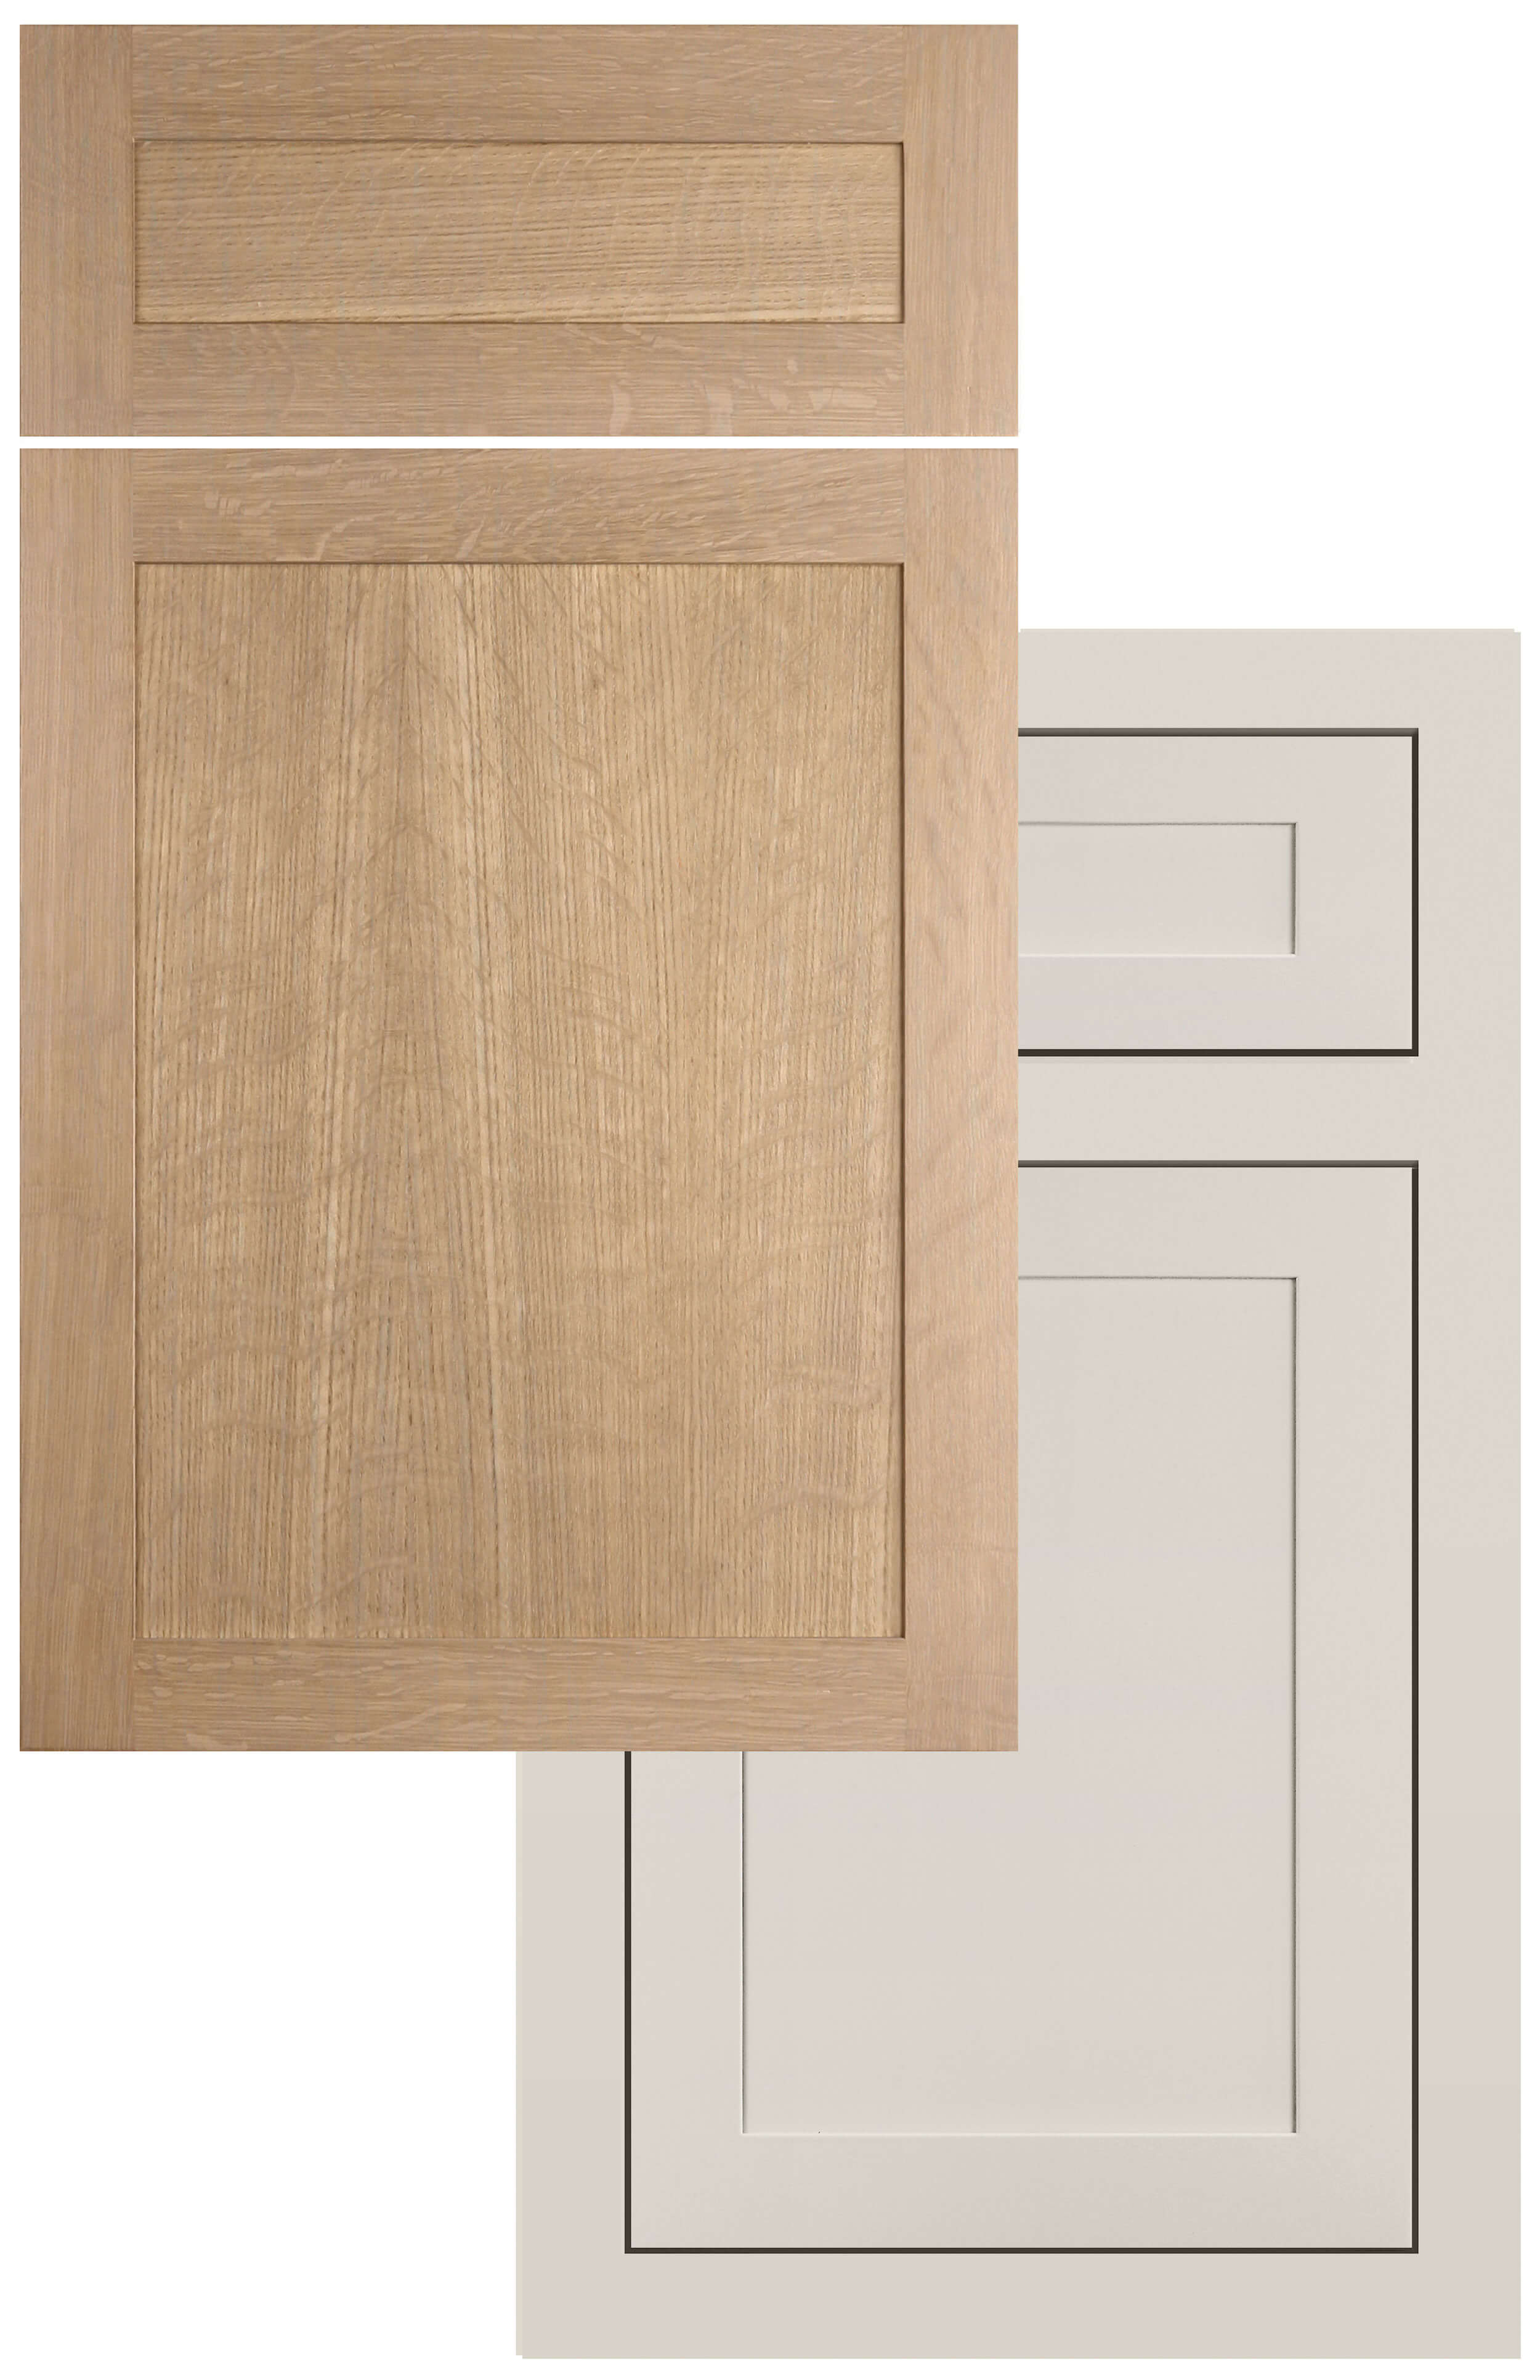 Shallow Shaker and skinny shaker door style for transitional and modern designs.